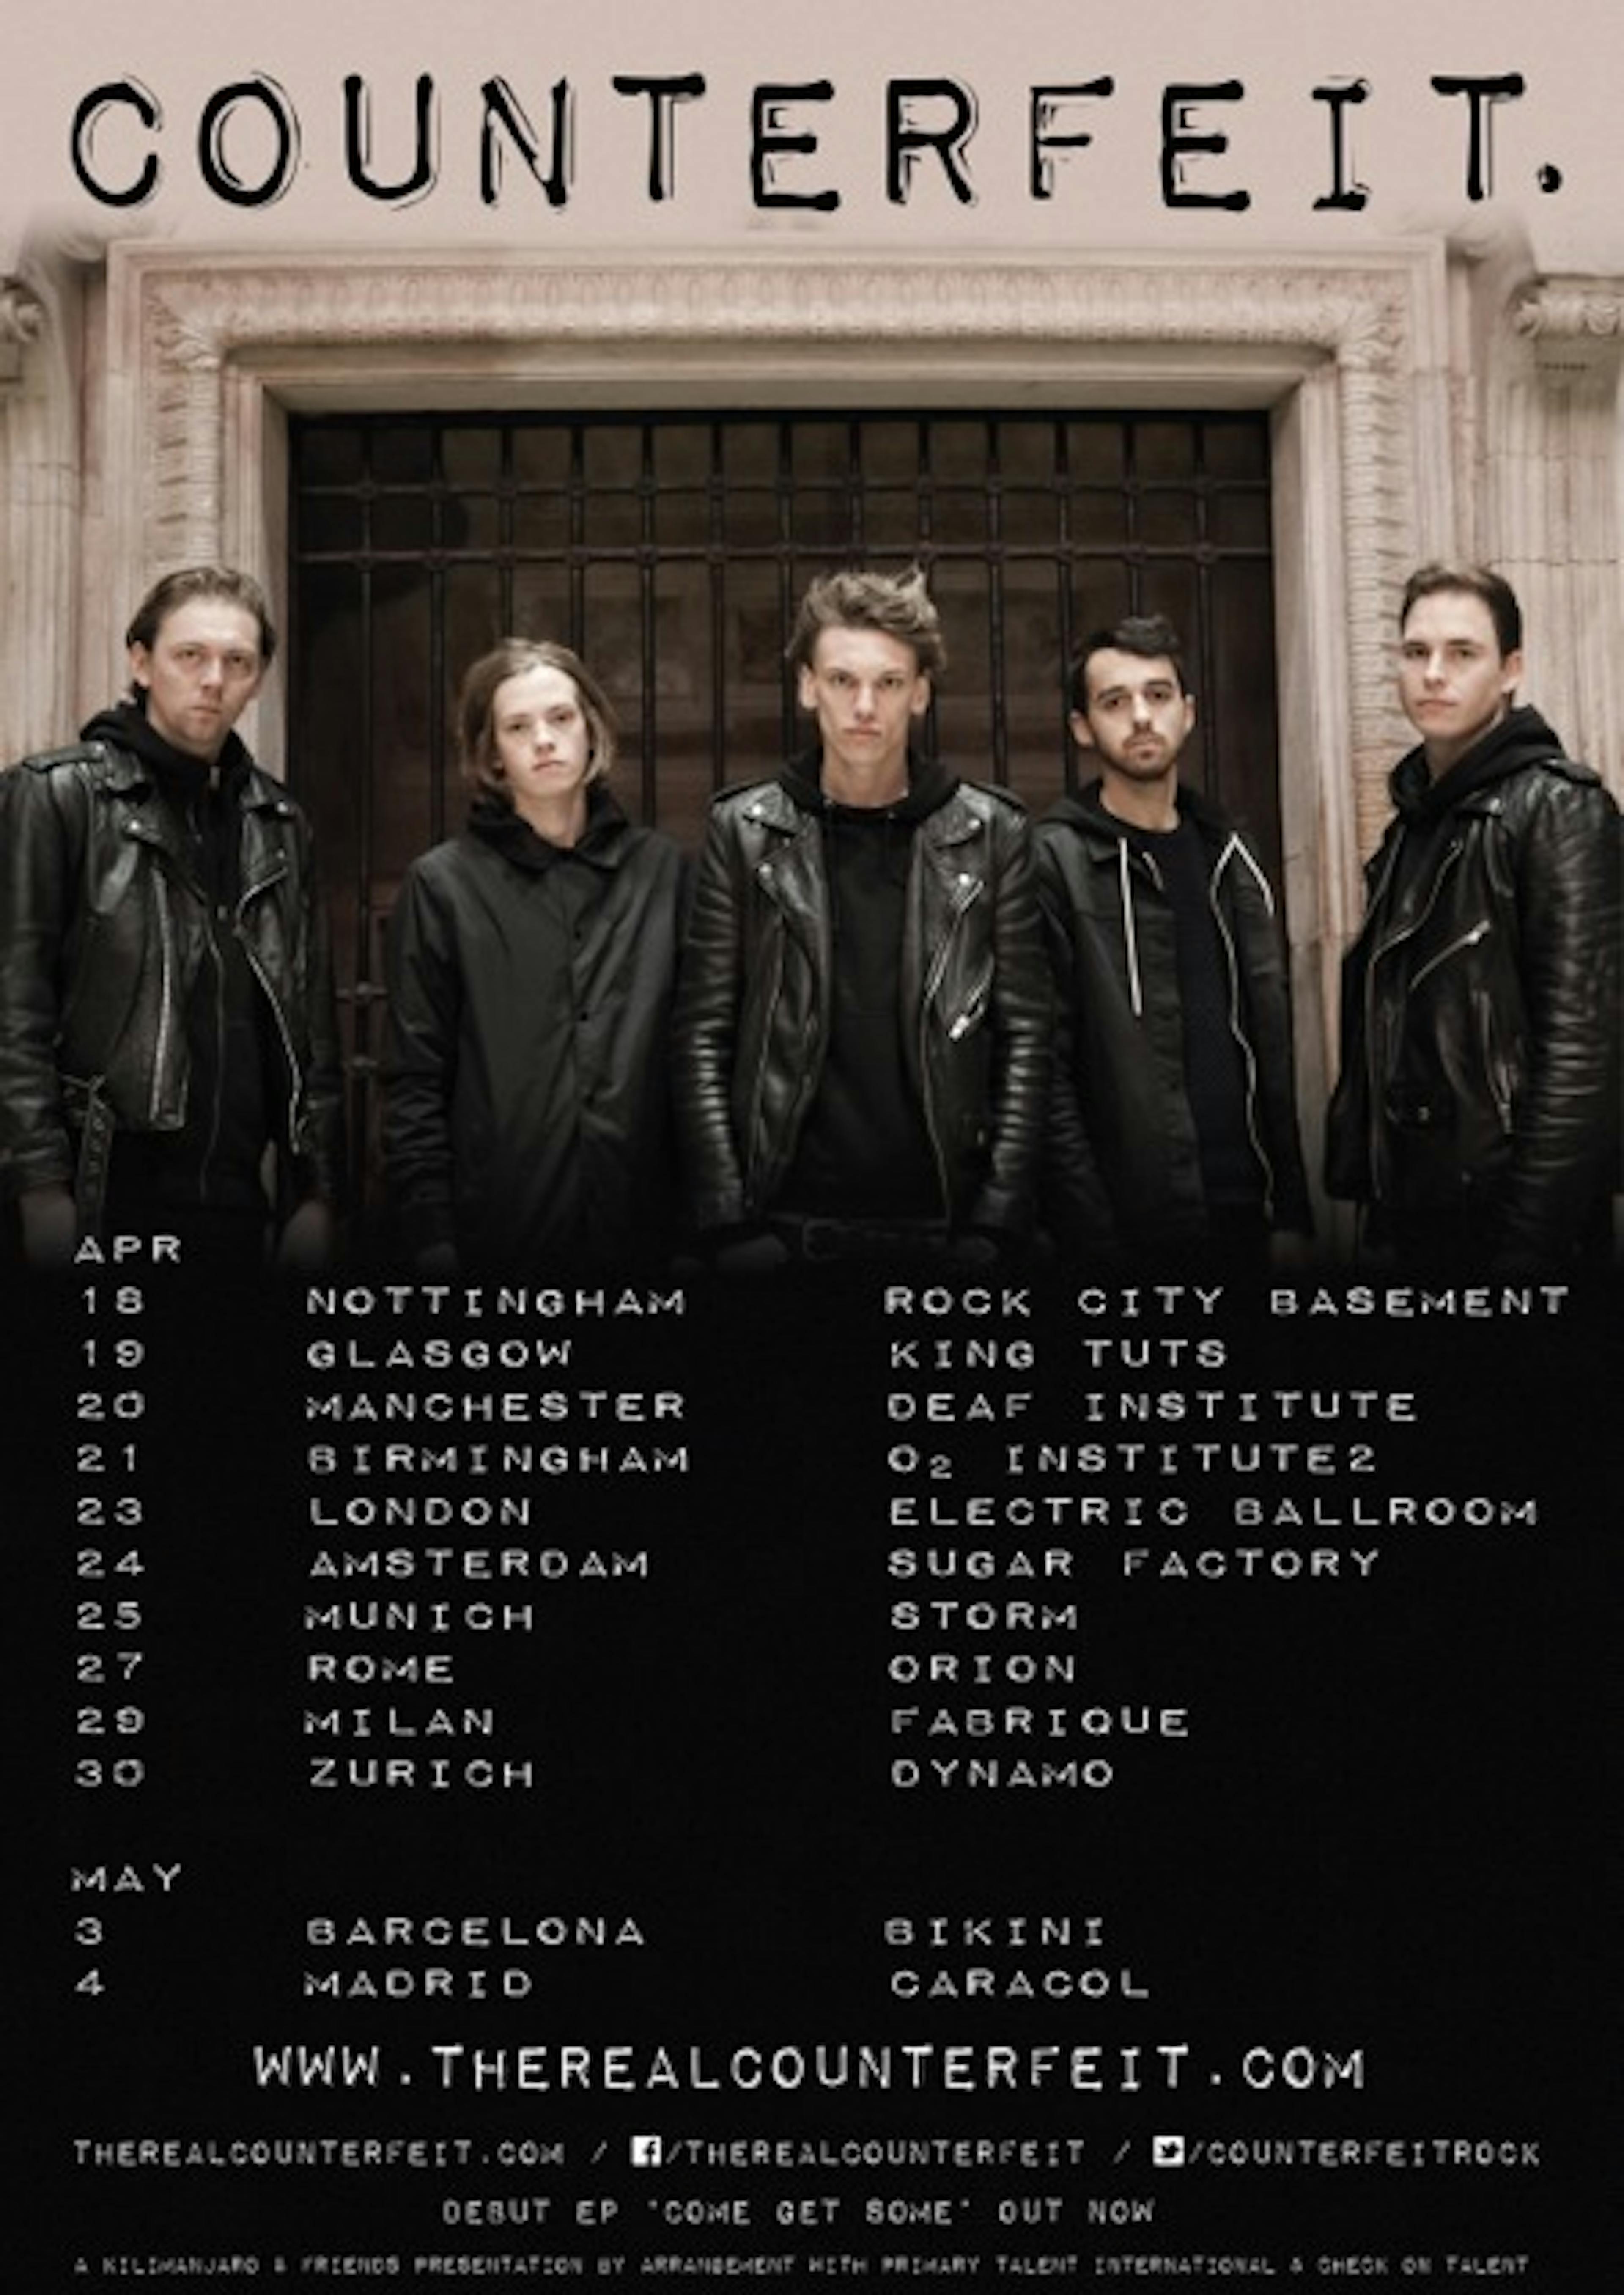 Counterfeit Announce More UK Shows